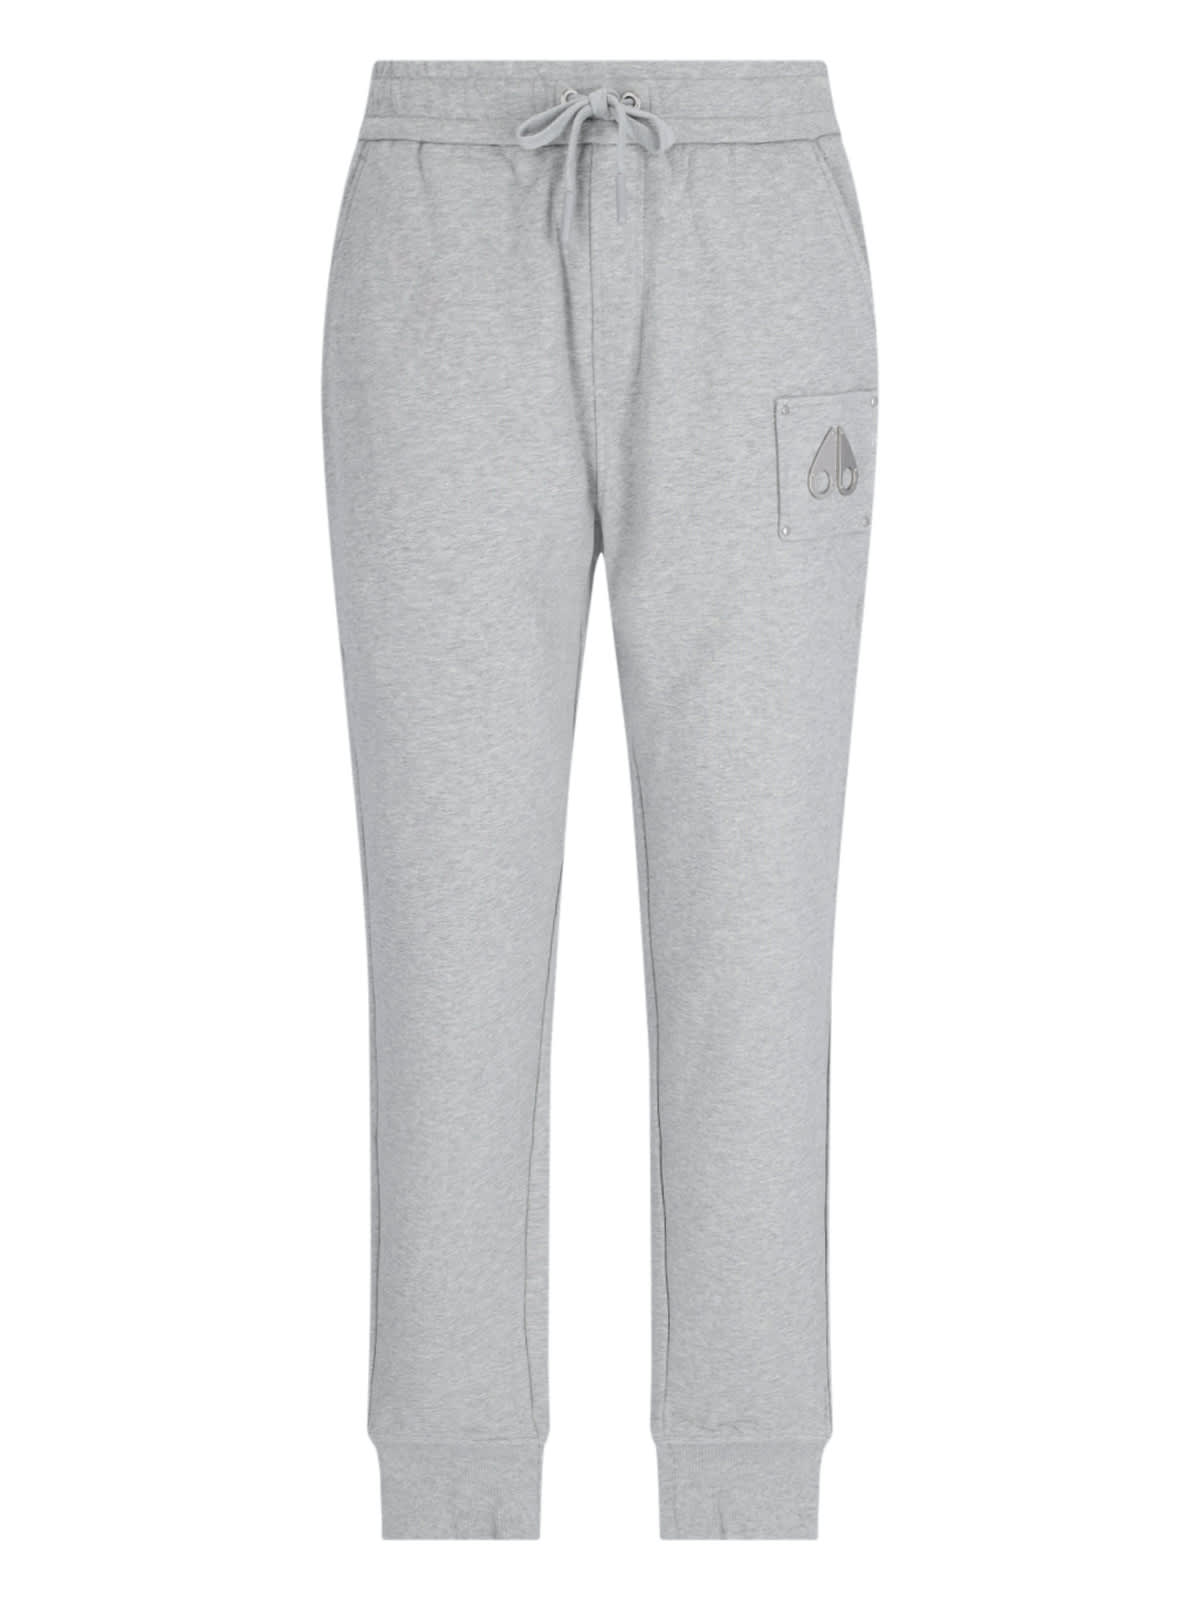 Moose Knuckles Joggers